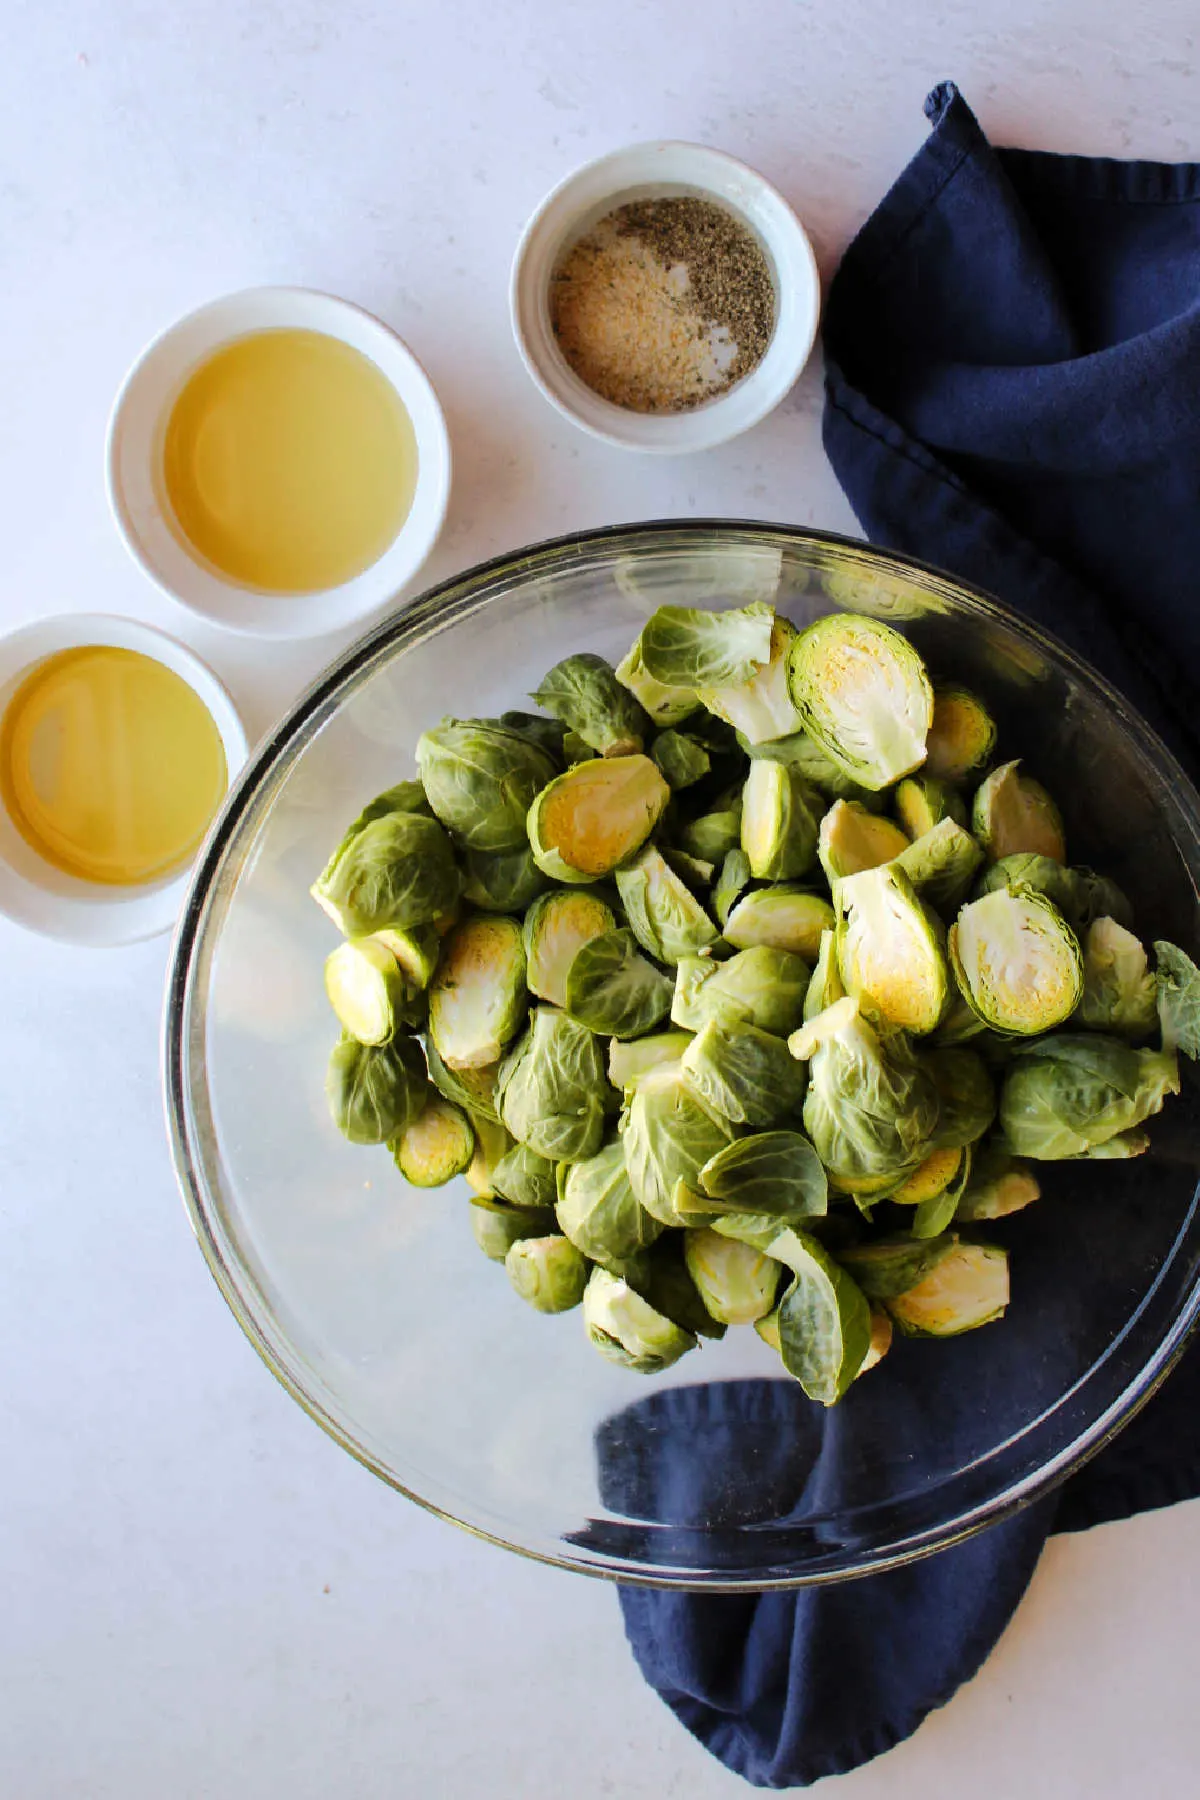 Ingredients for roasted brussels sprouts.